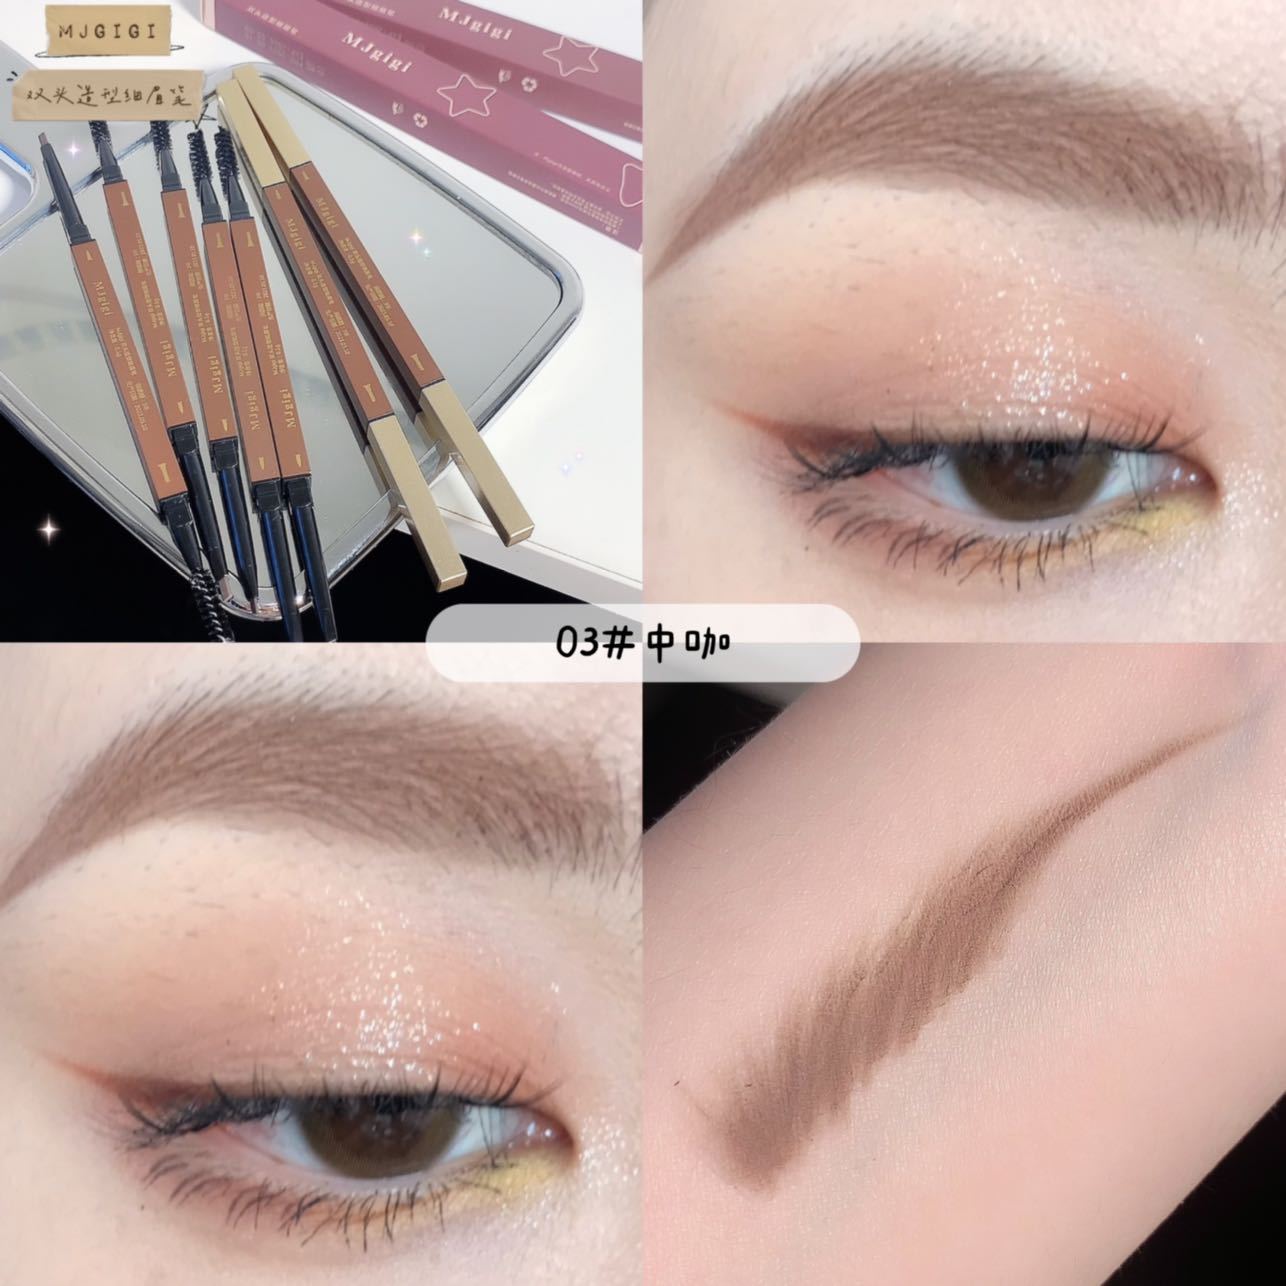 Thin Head Eyebrow Pencil Waterproof Waterproof Sweat-Proof Not Smudge Long-Lasting Colorfast Double-Headed Double-Effect Supernatural Thrush Gadget